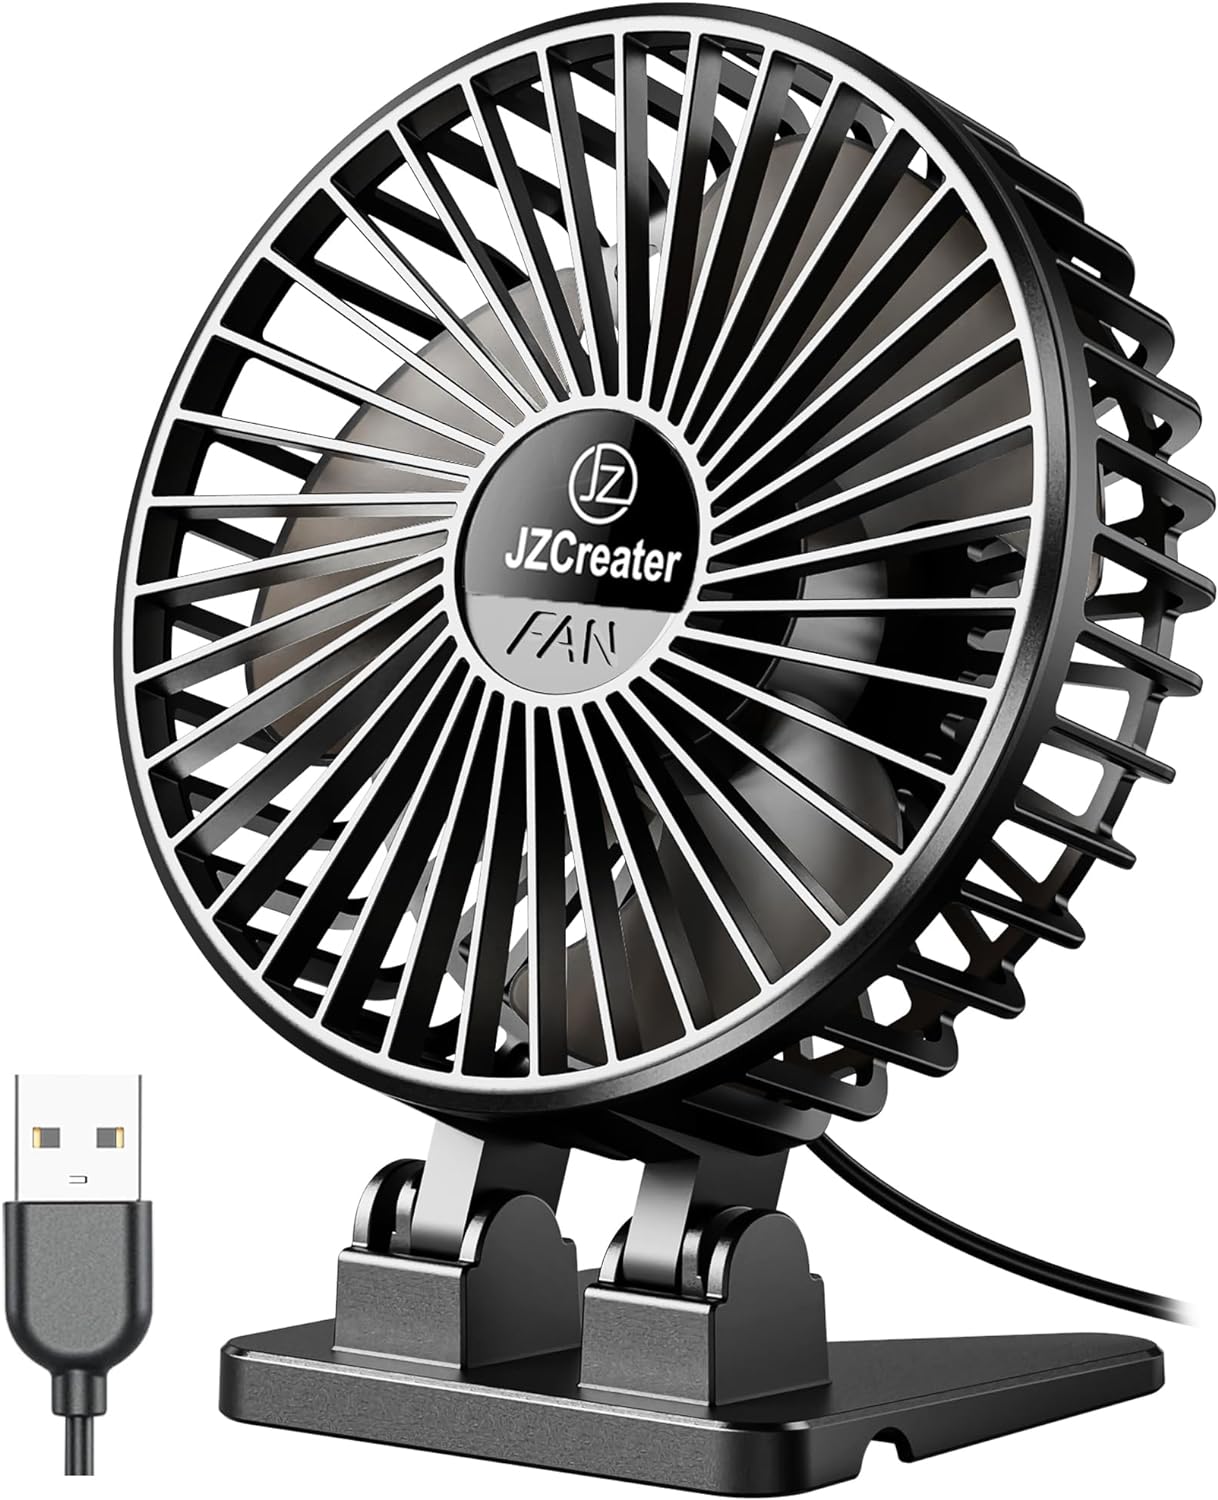 For those of us that cant sleep without a fan this is great for travel. Its small and easy to pack but puts off a good amount of air movement and sufficient white noise without being too loud.